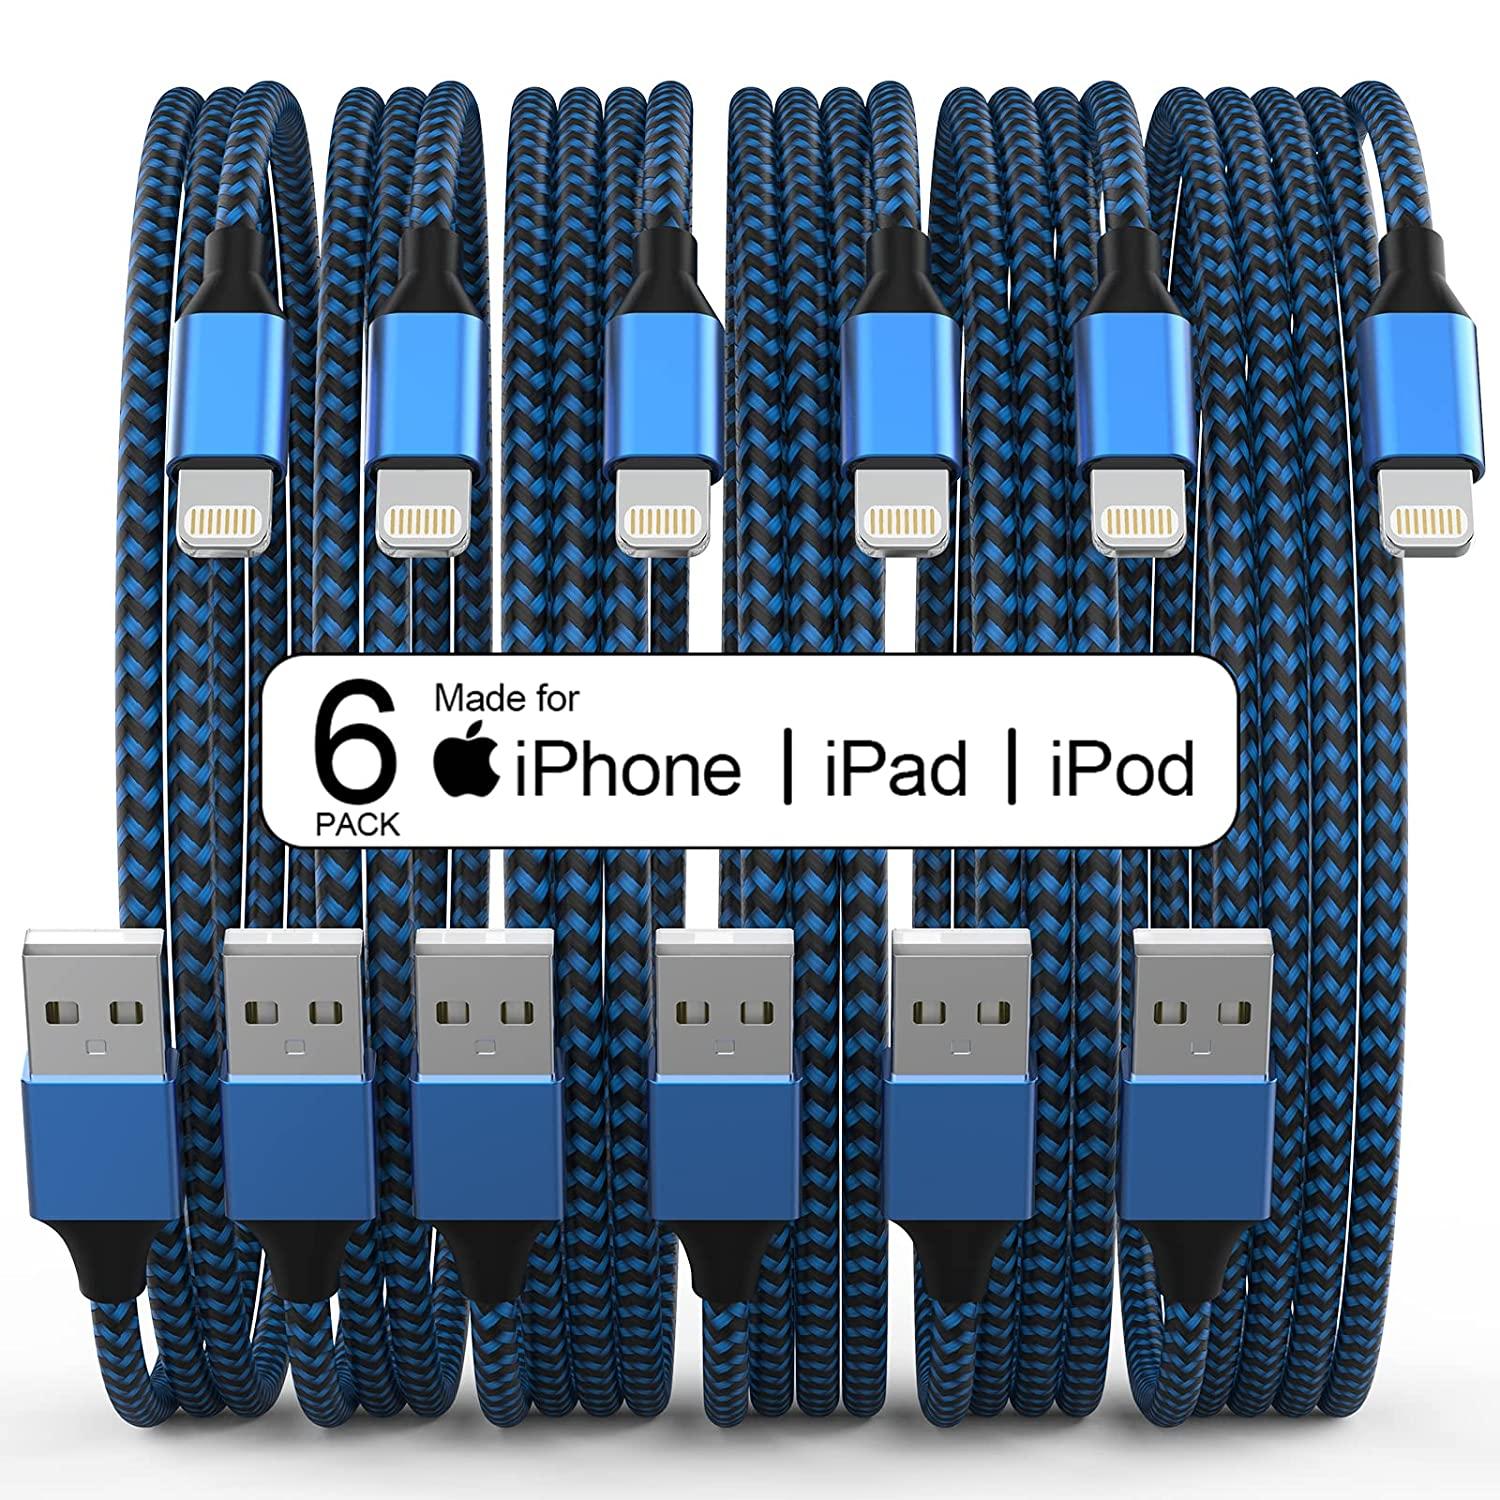 6 Wacaur Nylon Braided USB-A to Apple iPhone Lightning Charging Cables for $7.99